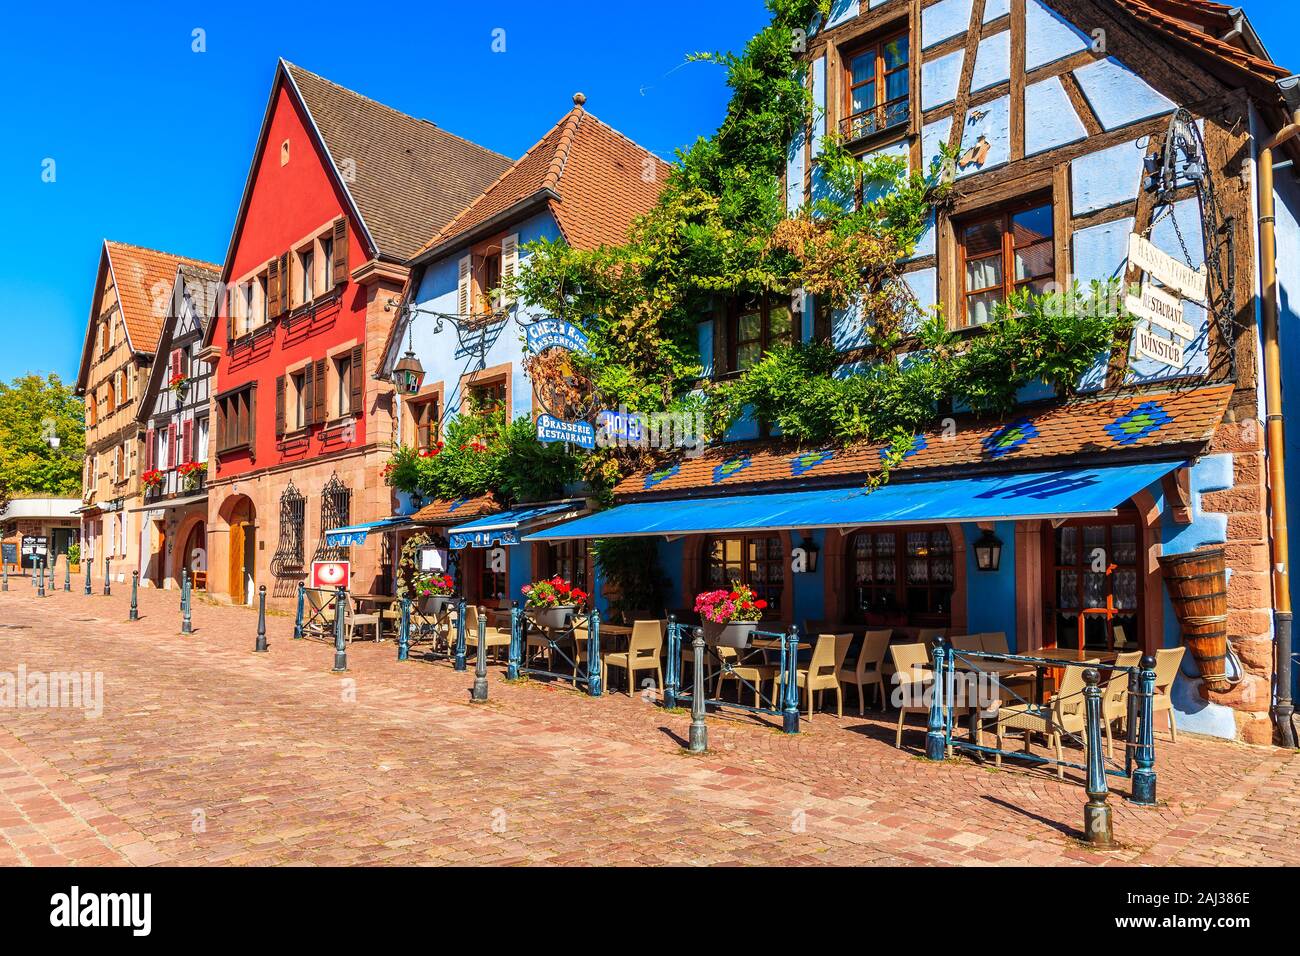 ALSACE WINE REGION, FRANCE - SEP 19, 2019: Typical restaurant in Kaysersberg village which is located on Alsatian Wine Route, France. Stock Photo